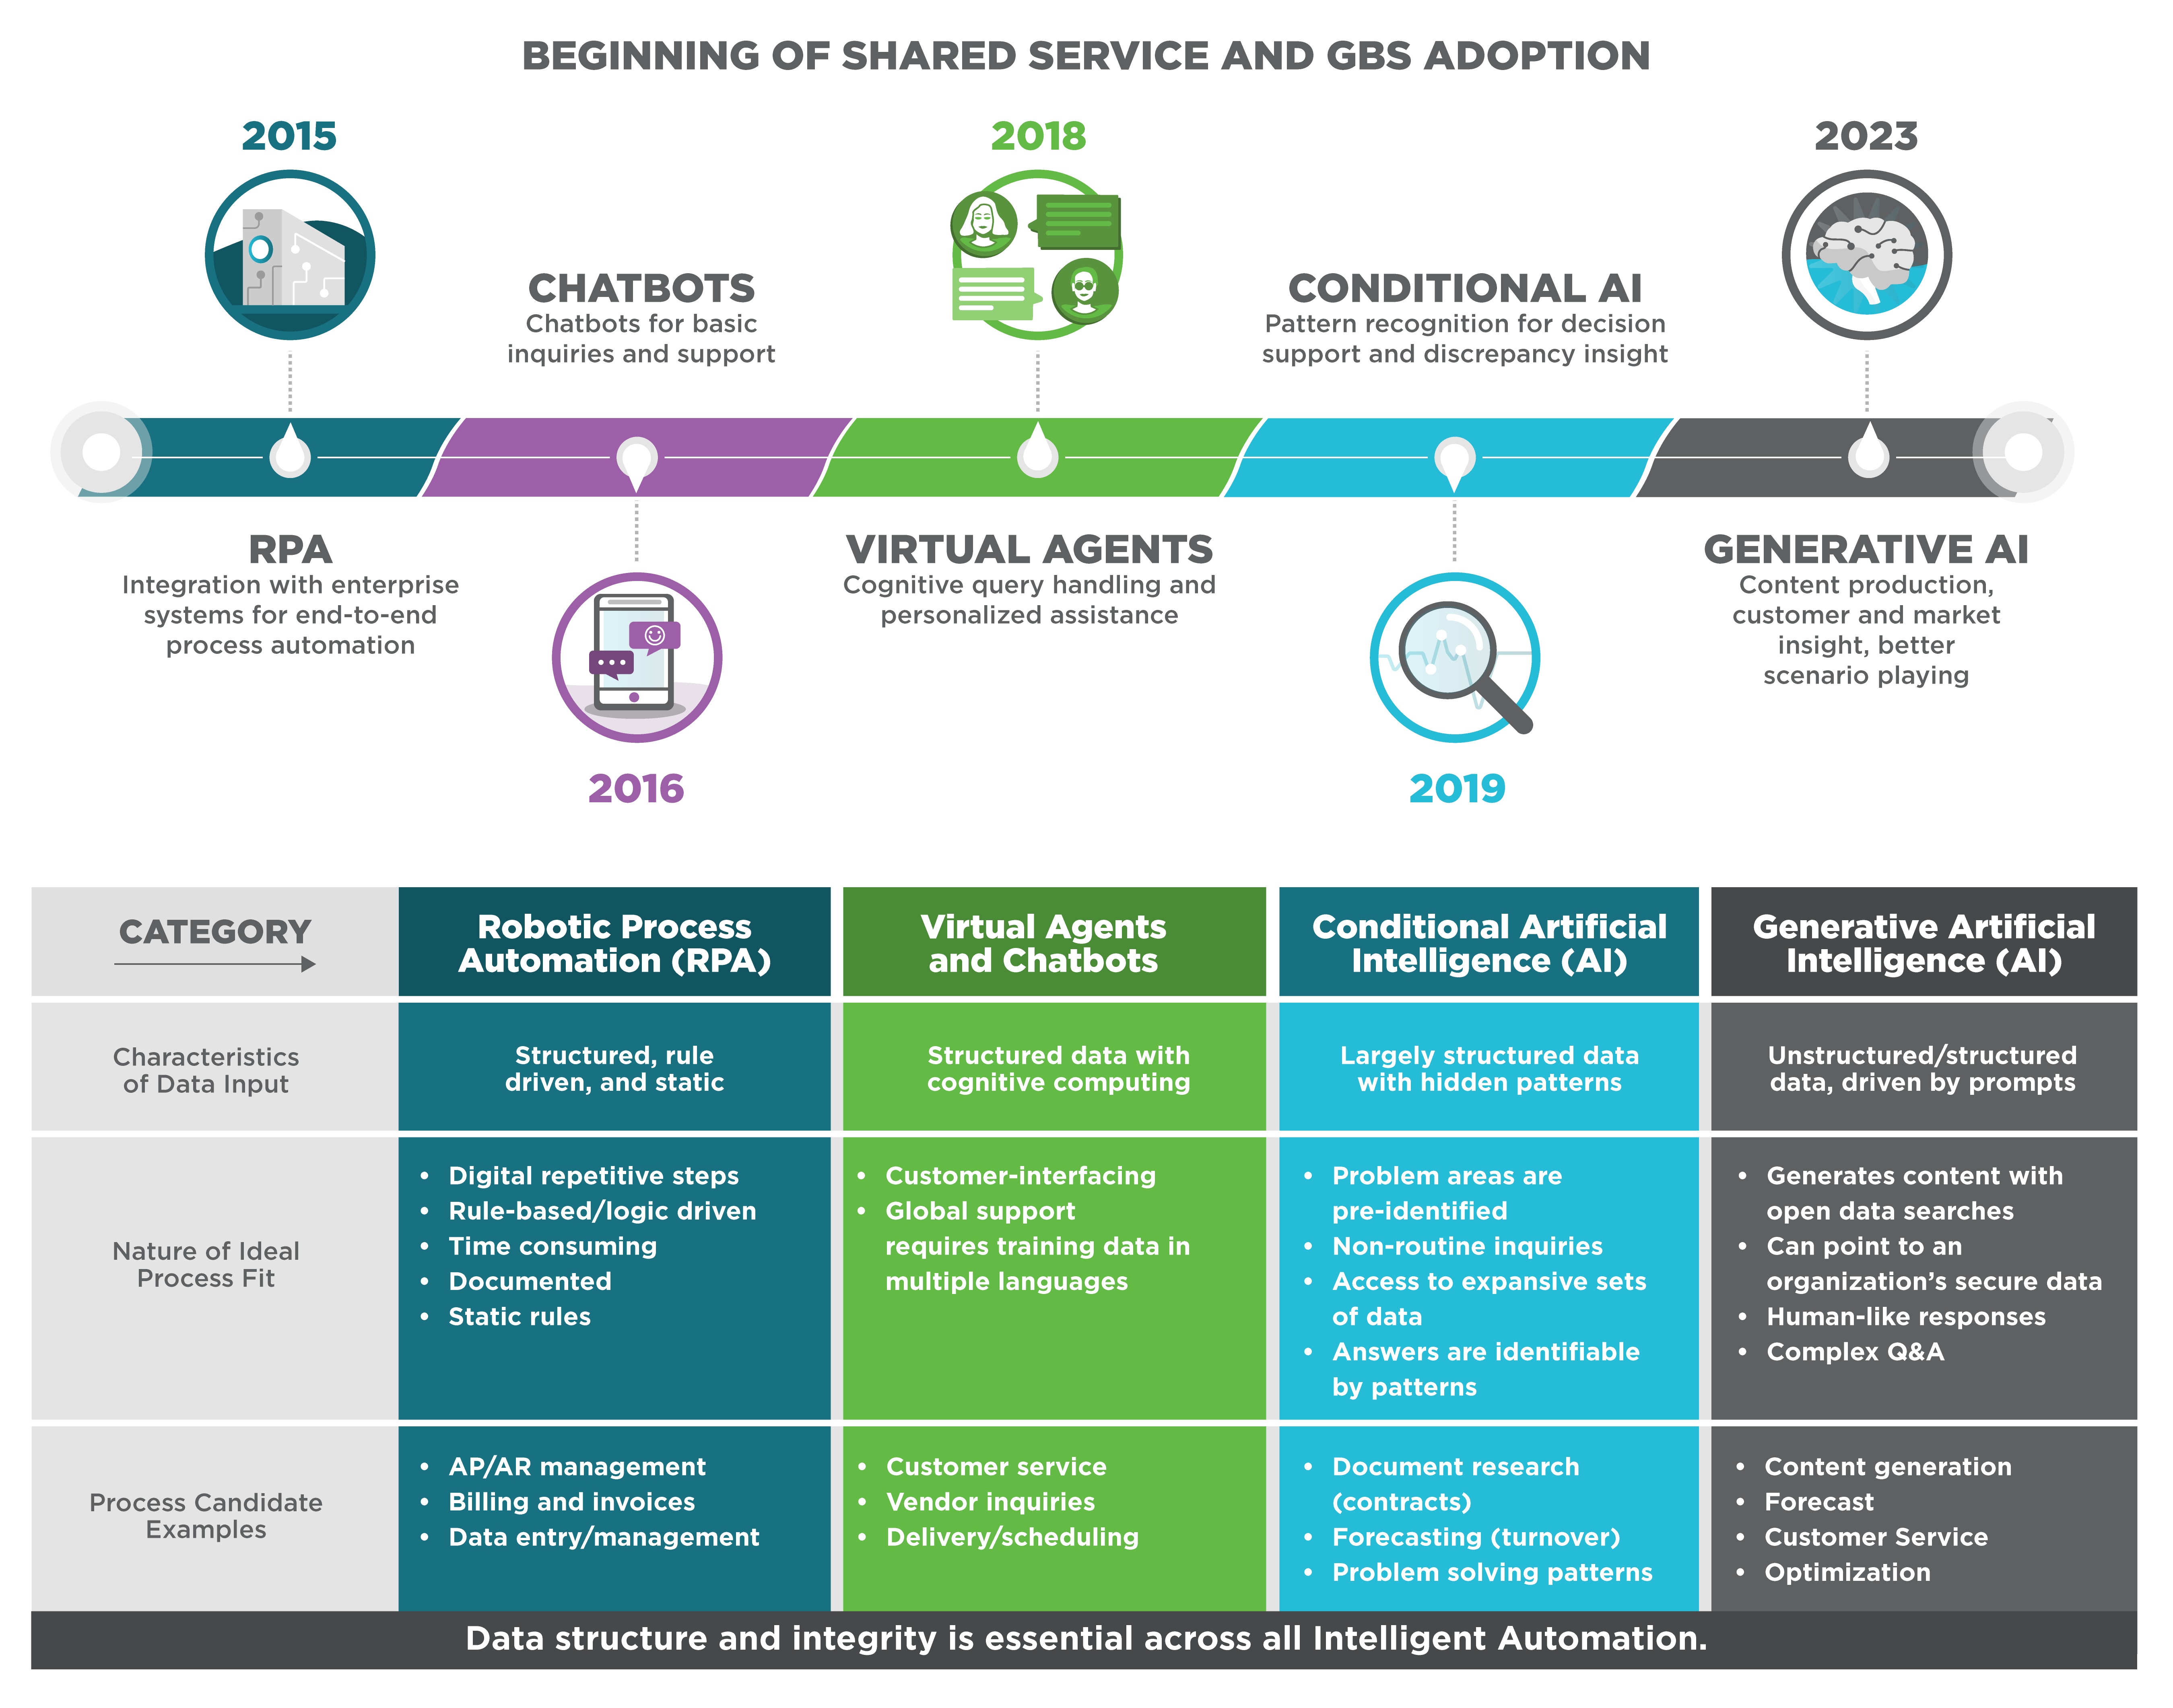 Generative AI - The beginning of Shared Service and GBS Adoption, 2015-2023 timeline